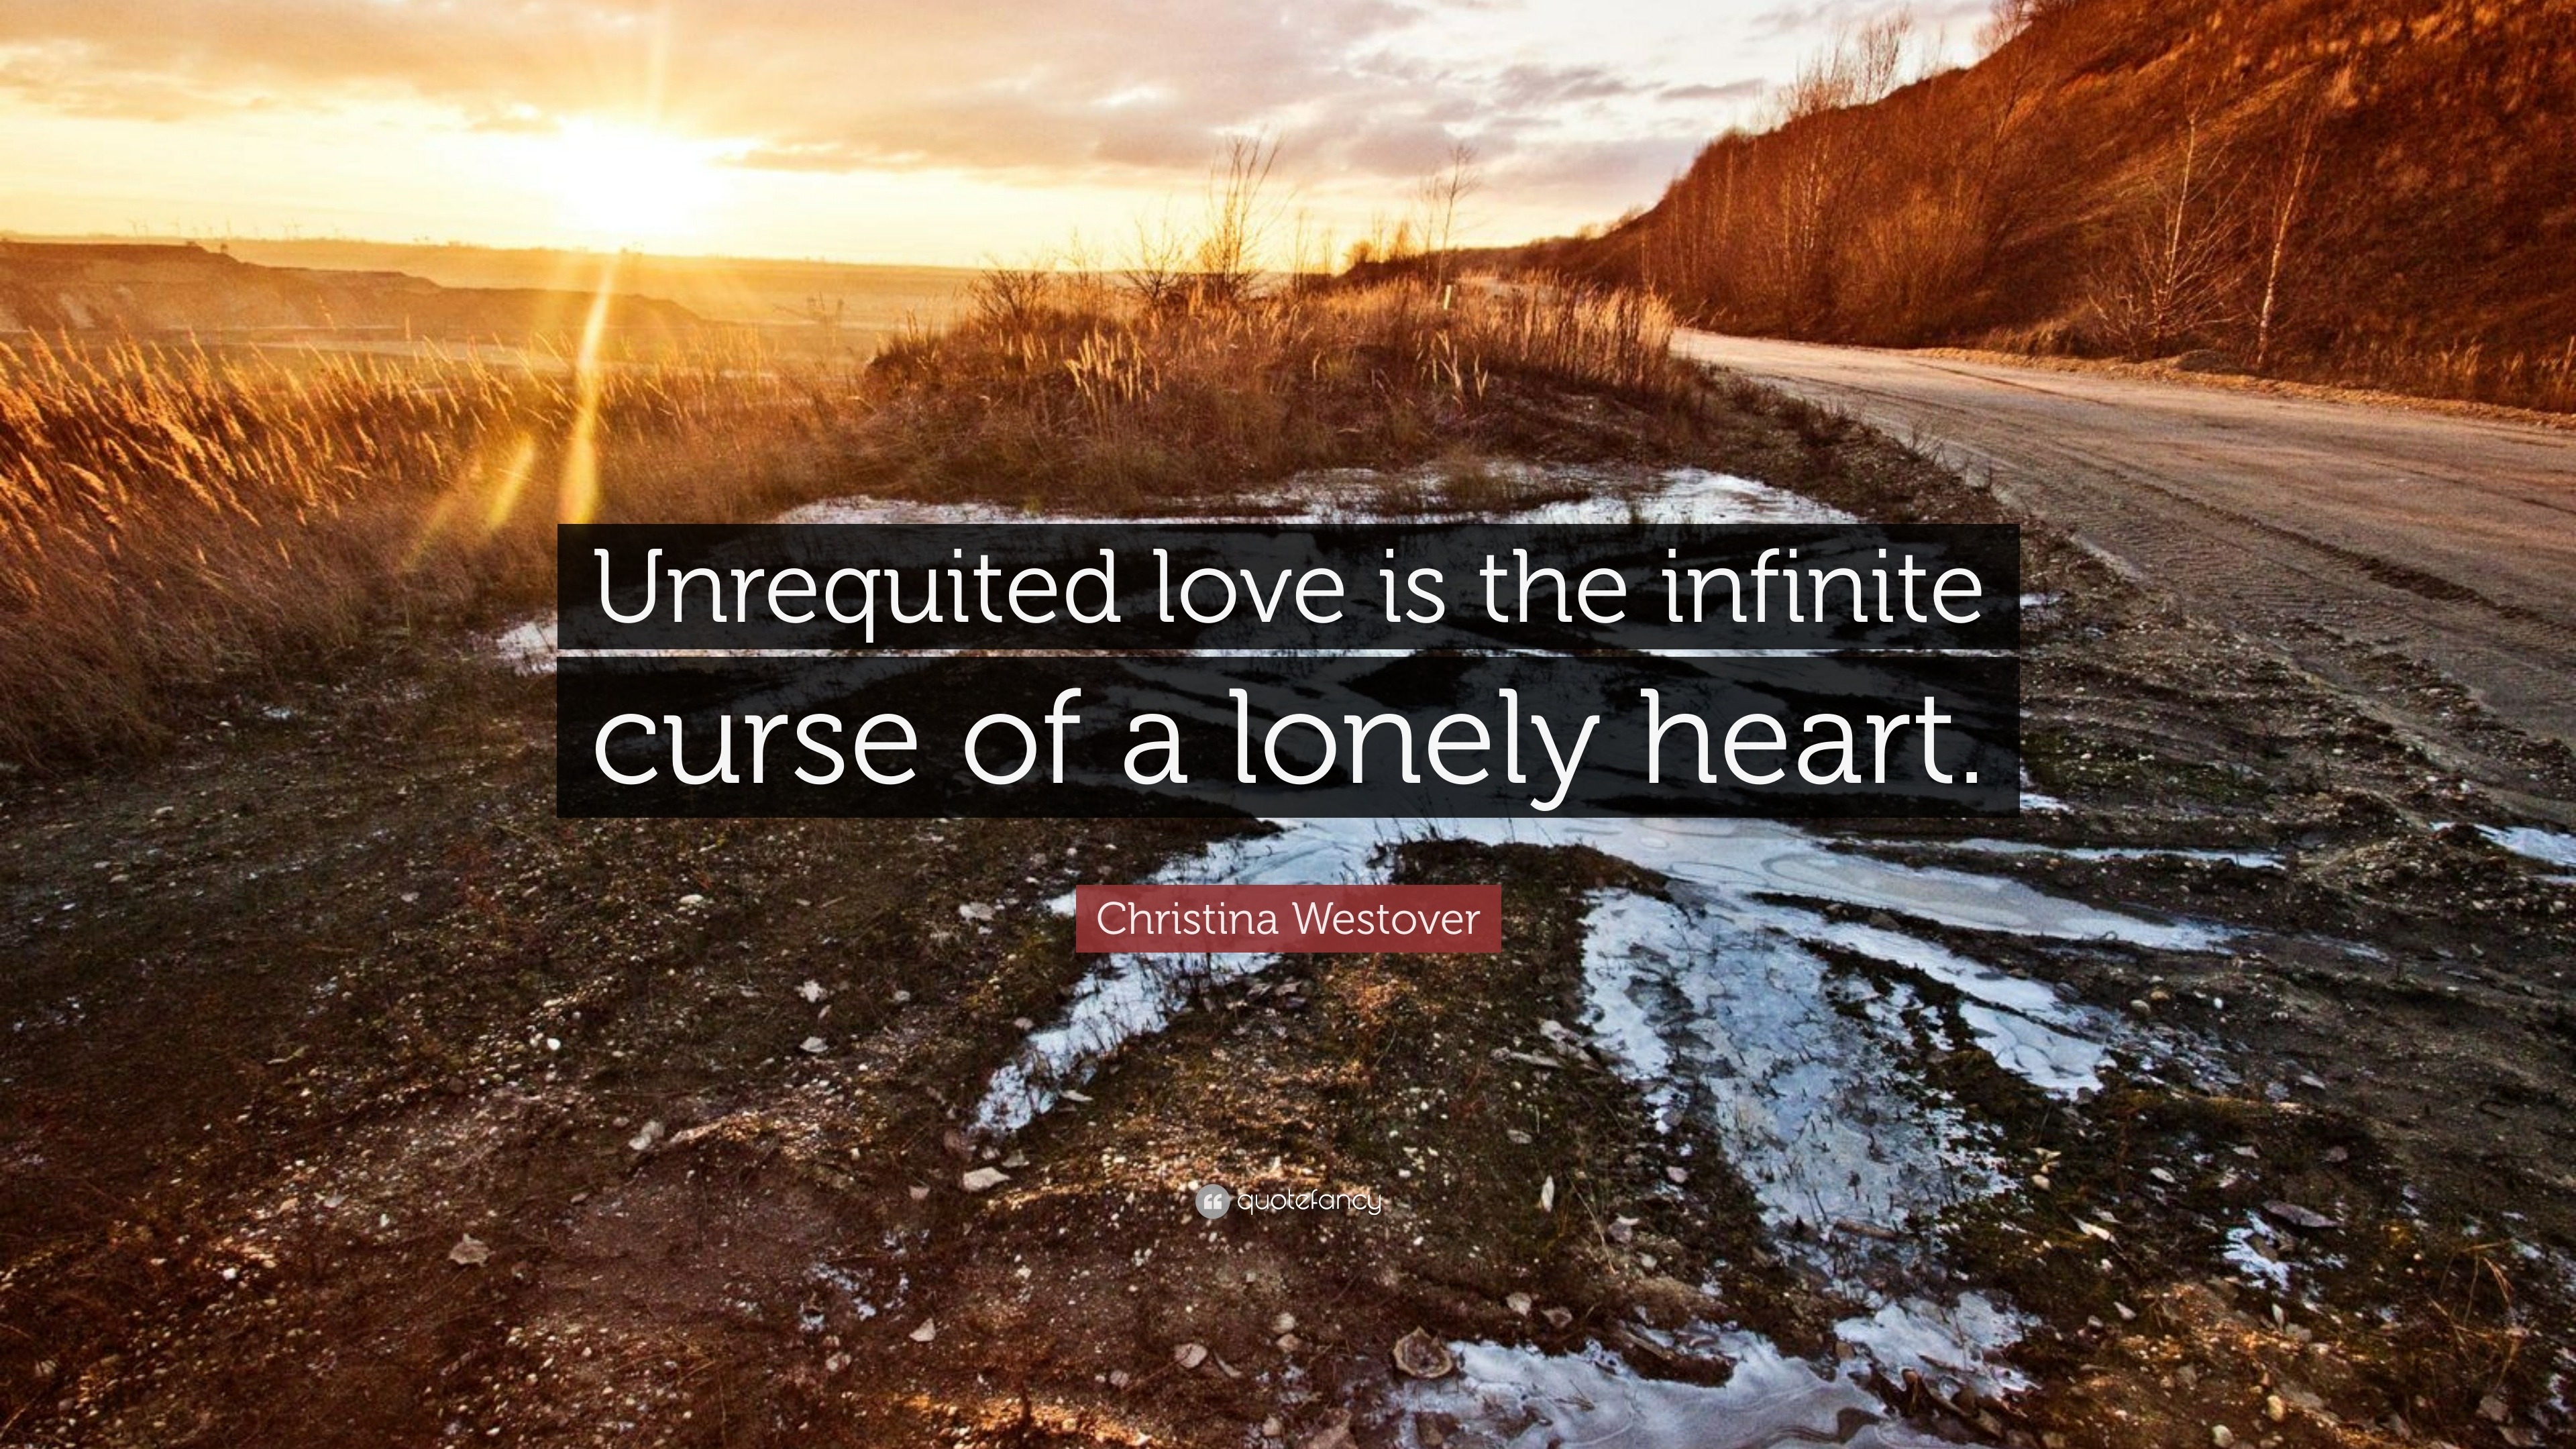 Christina Westover Quote “Unrequited love is the infinite curse of a lonely heart